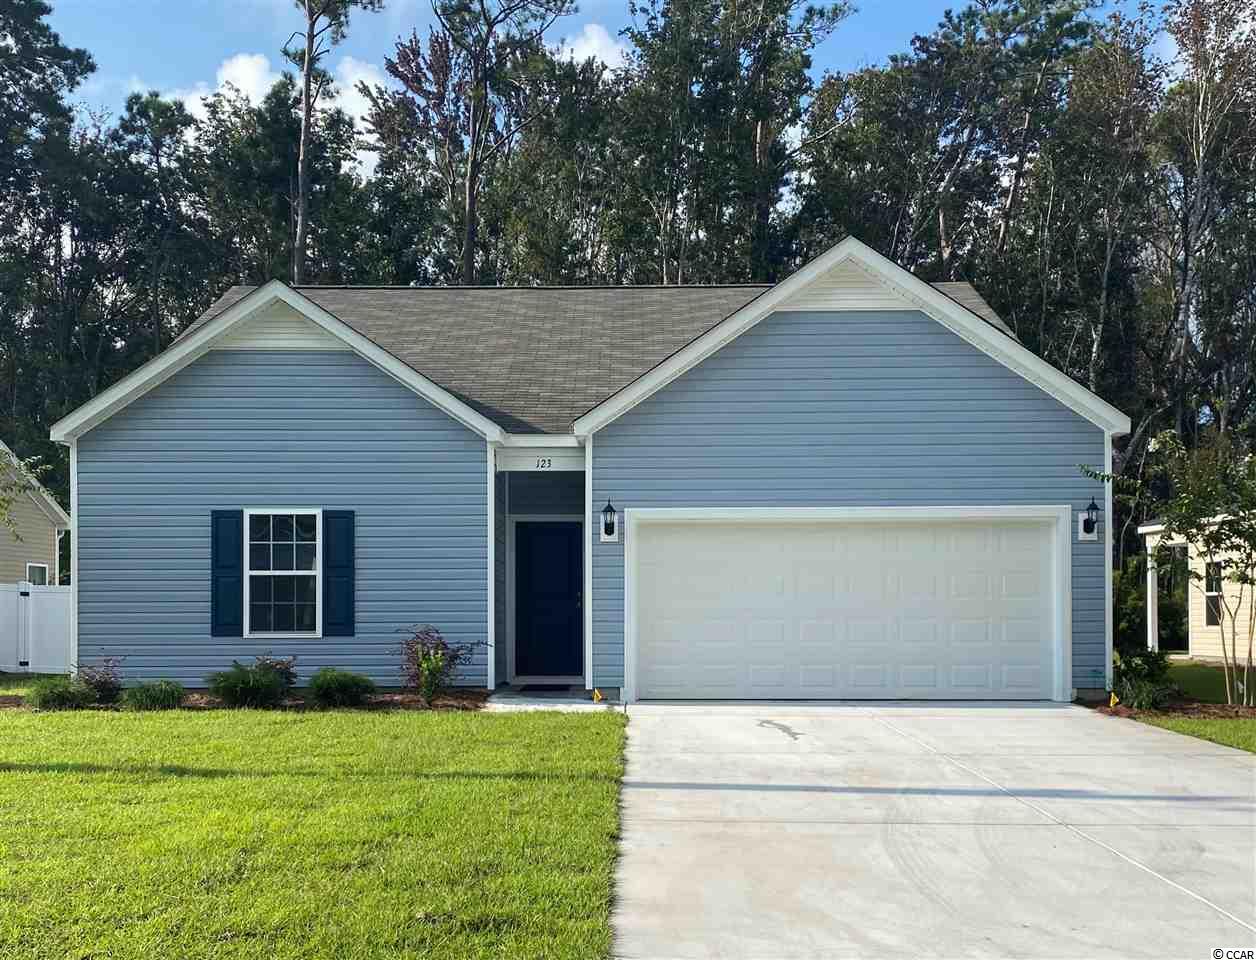 123 Clearwater Dr. Pawleys Island, SC 29585